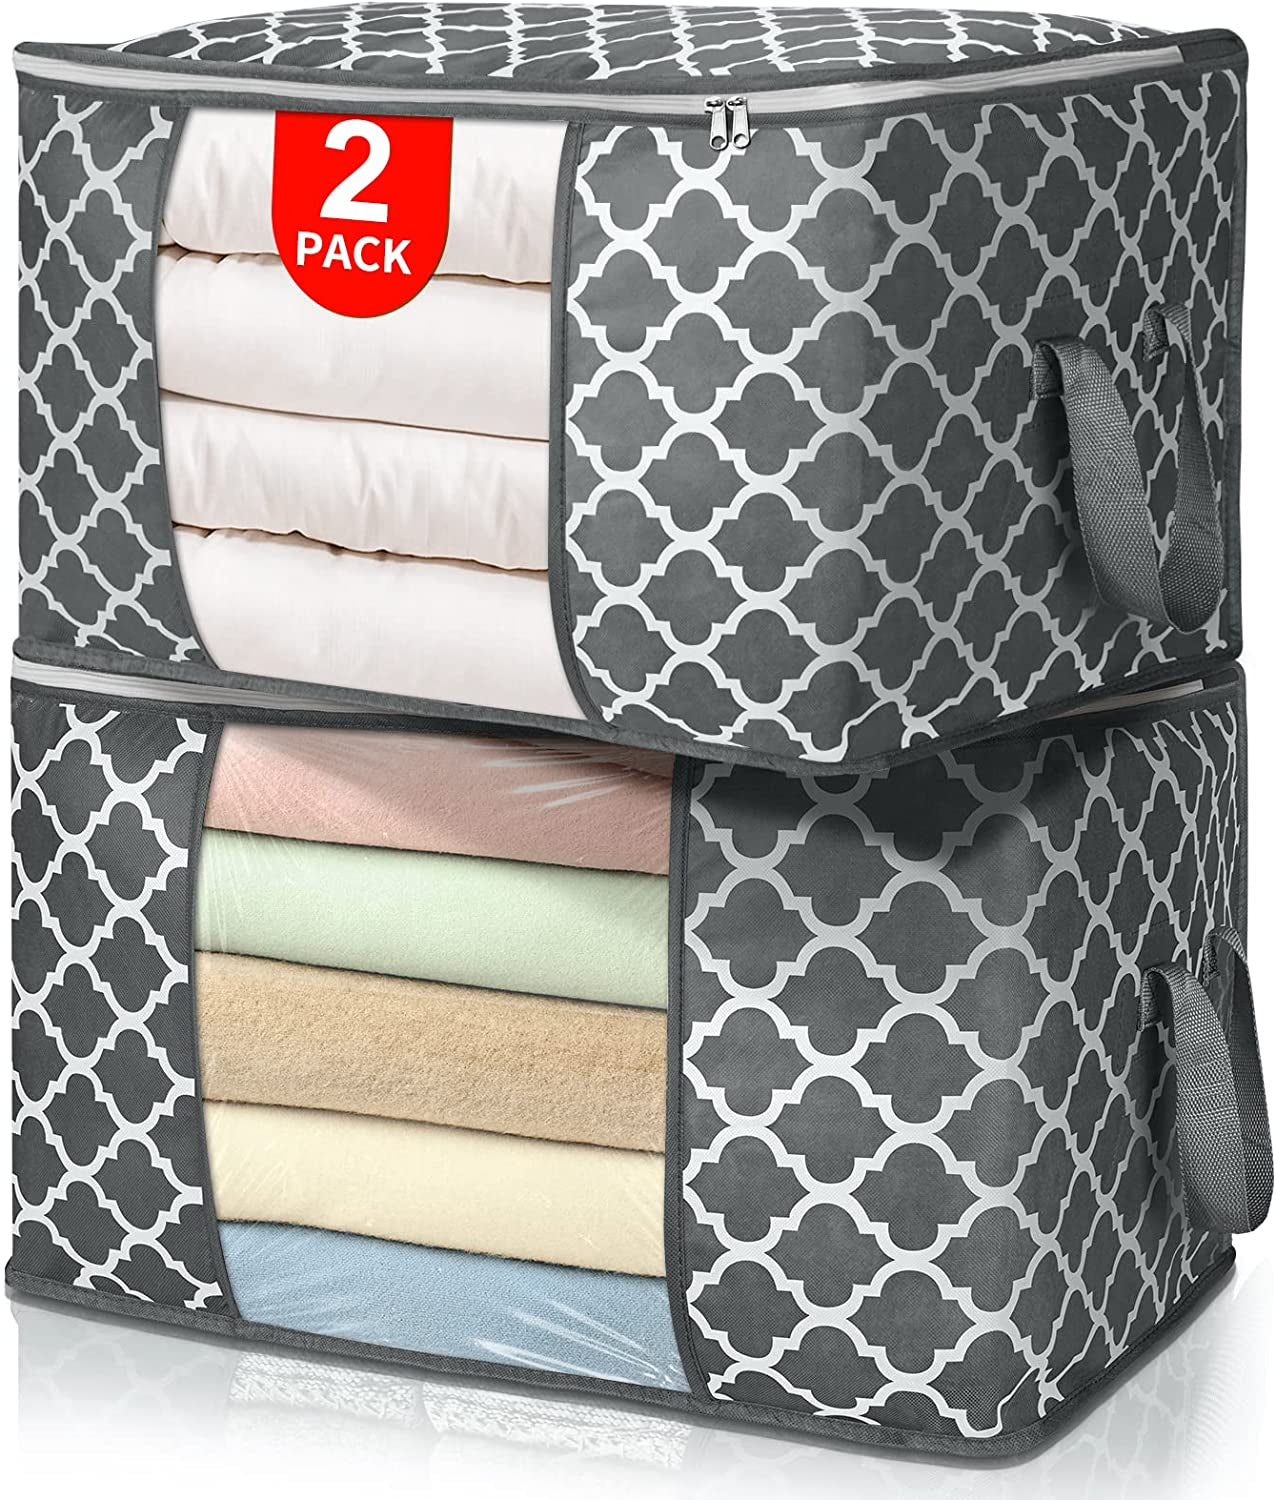 90L Large Storage Bags, 6 Pack Clothes Storage Bins Foldable Closet Organizers Storage Containers with Durable Handle & Zipper for Clothing, Blanket, Comforters, Bed Sheets, Pillows and Toys (Gray)